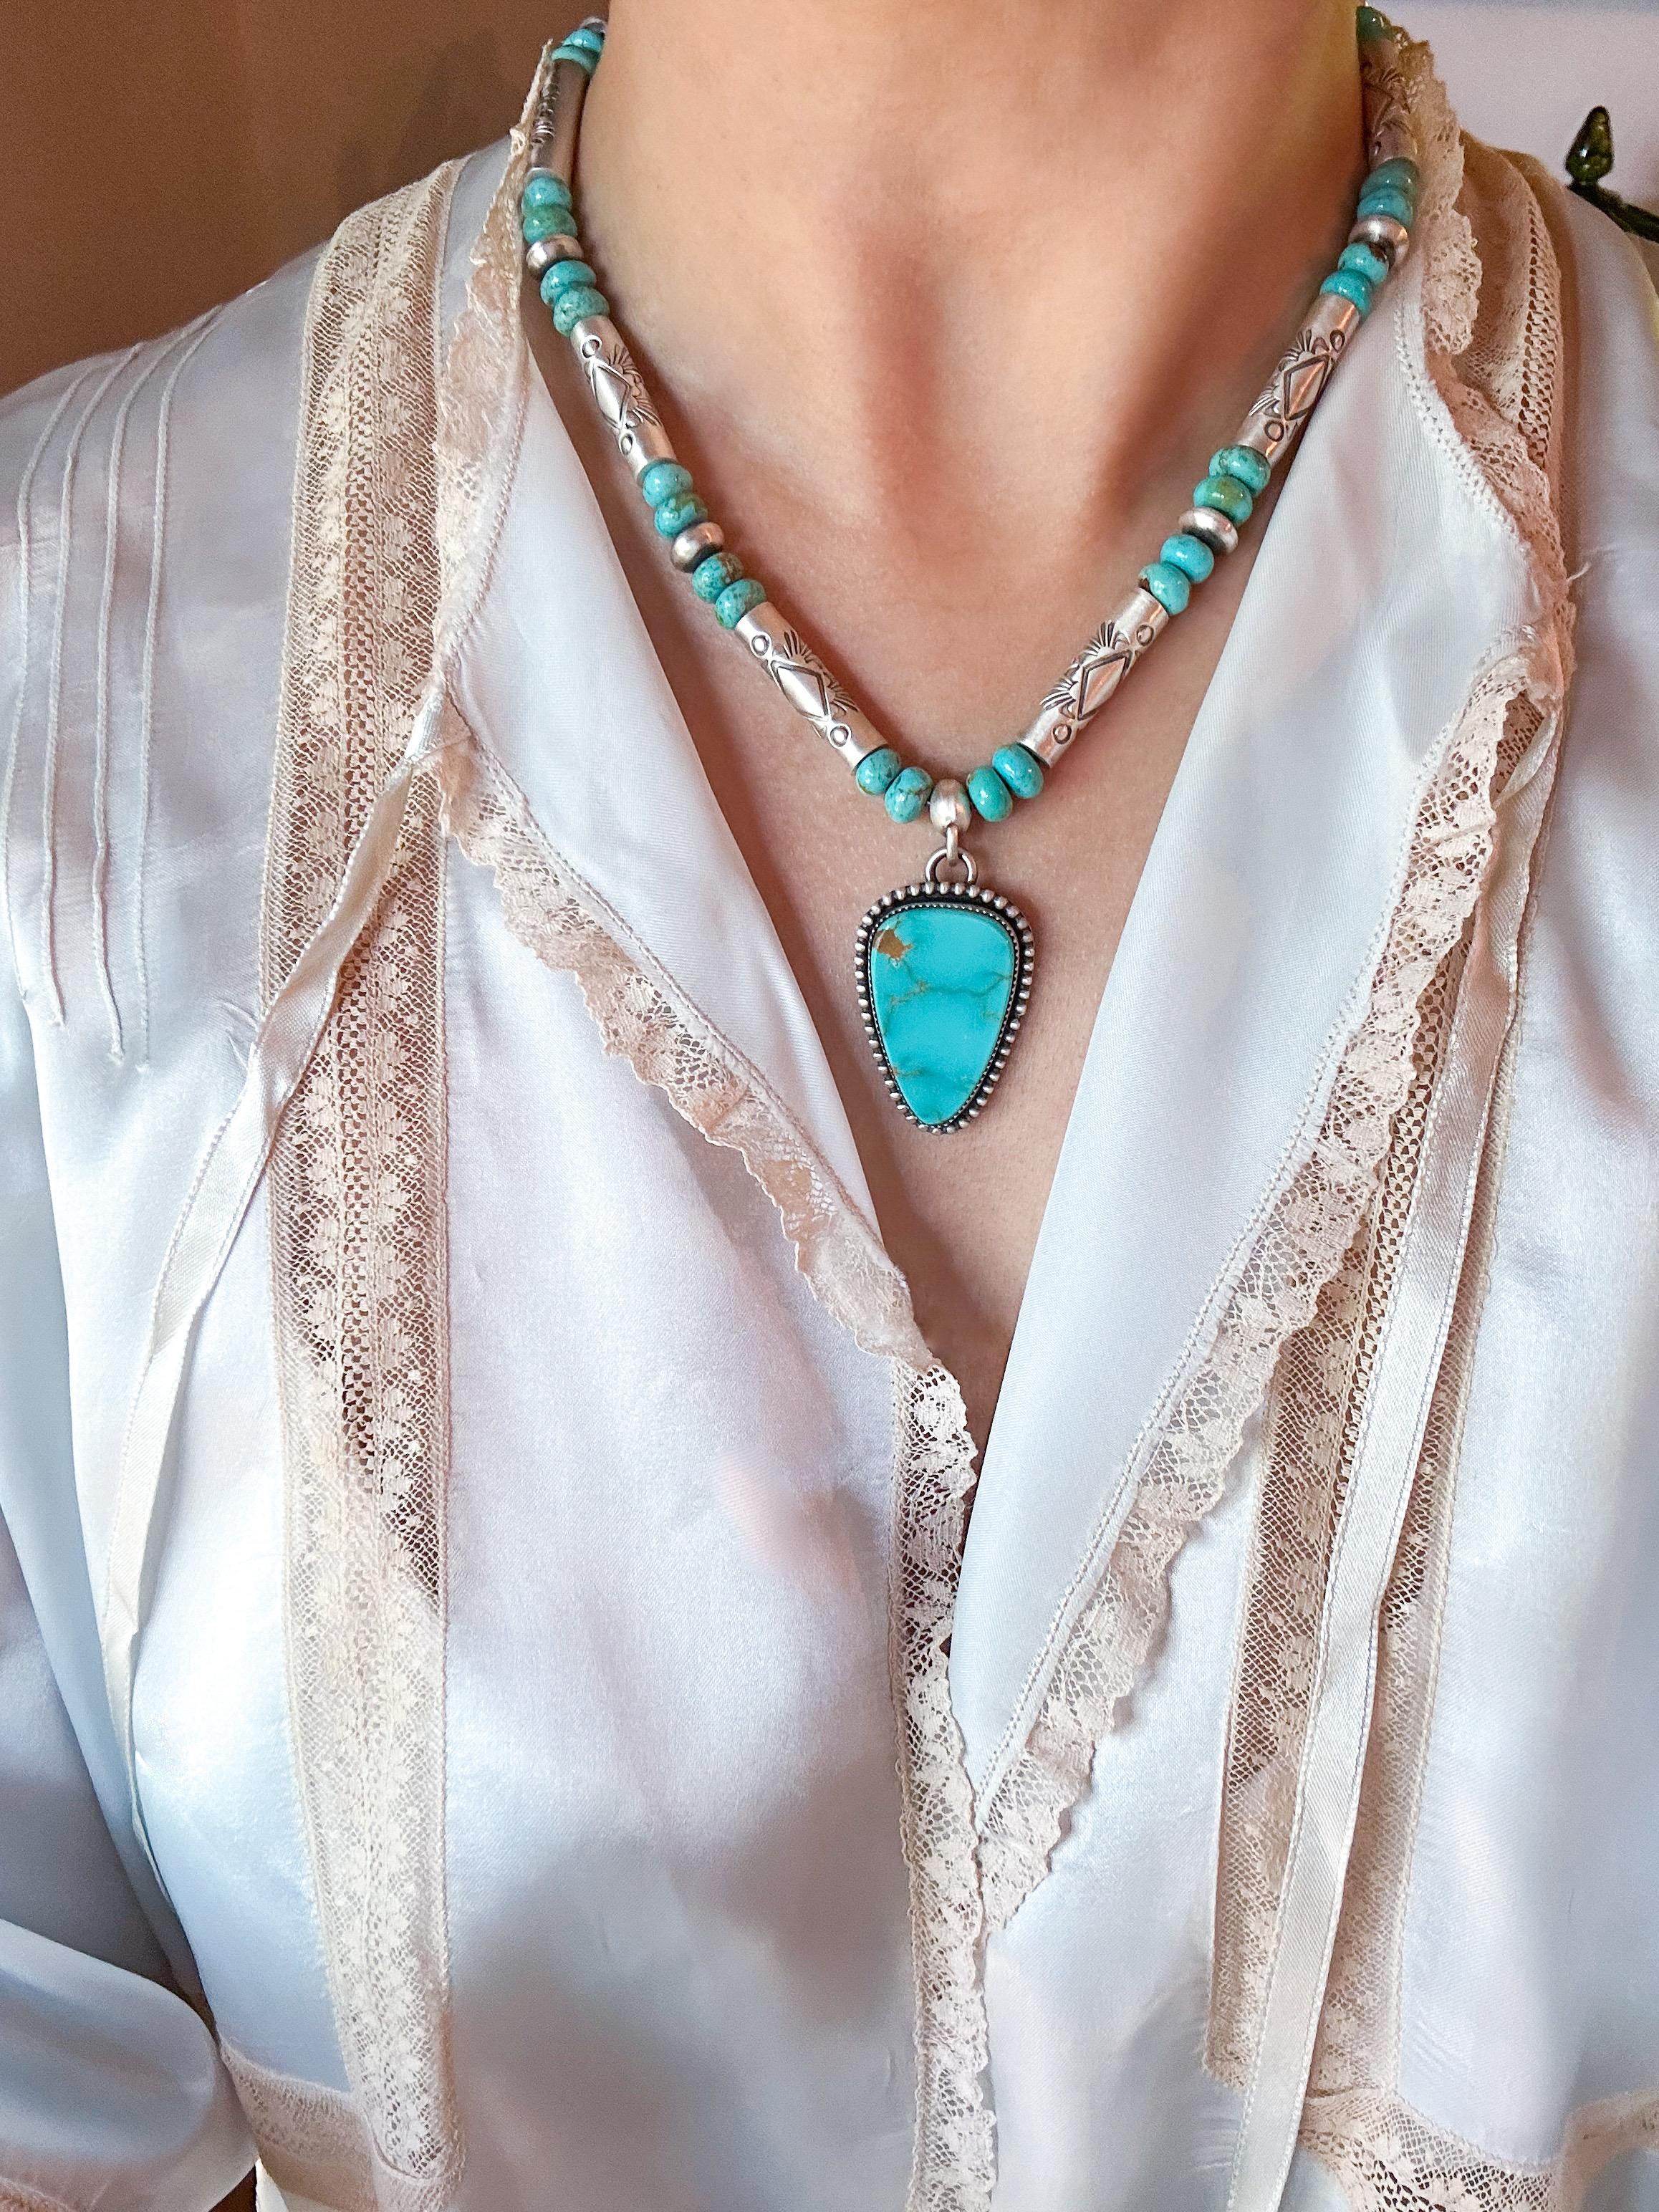 Native American Kingman Turquoise Fine Silver Beaded Necklace with Sonoran Pendant For Sale